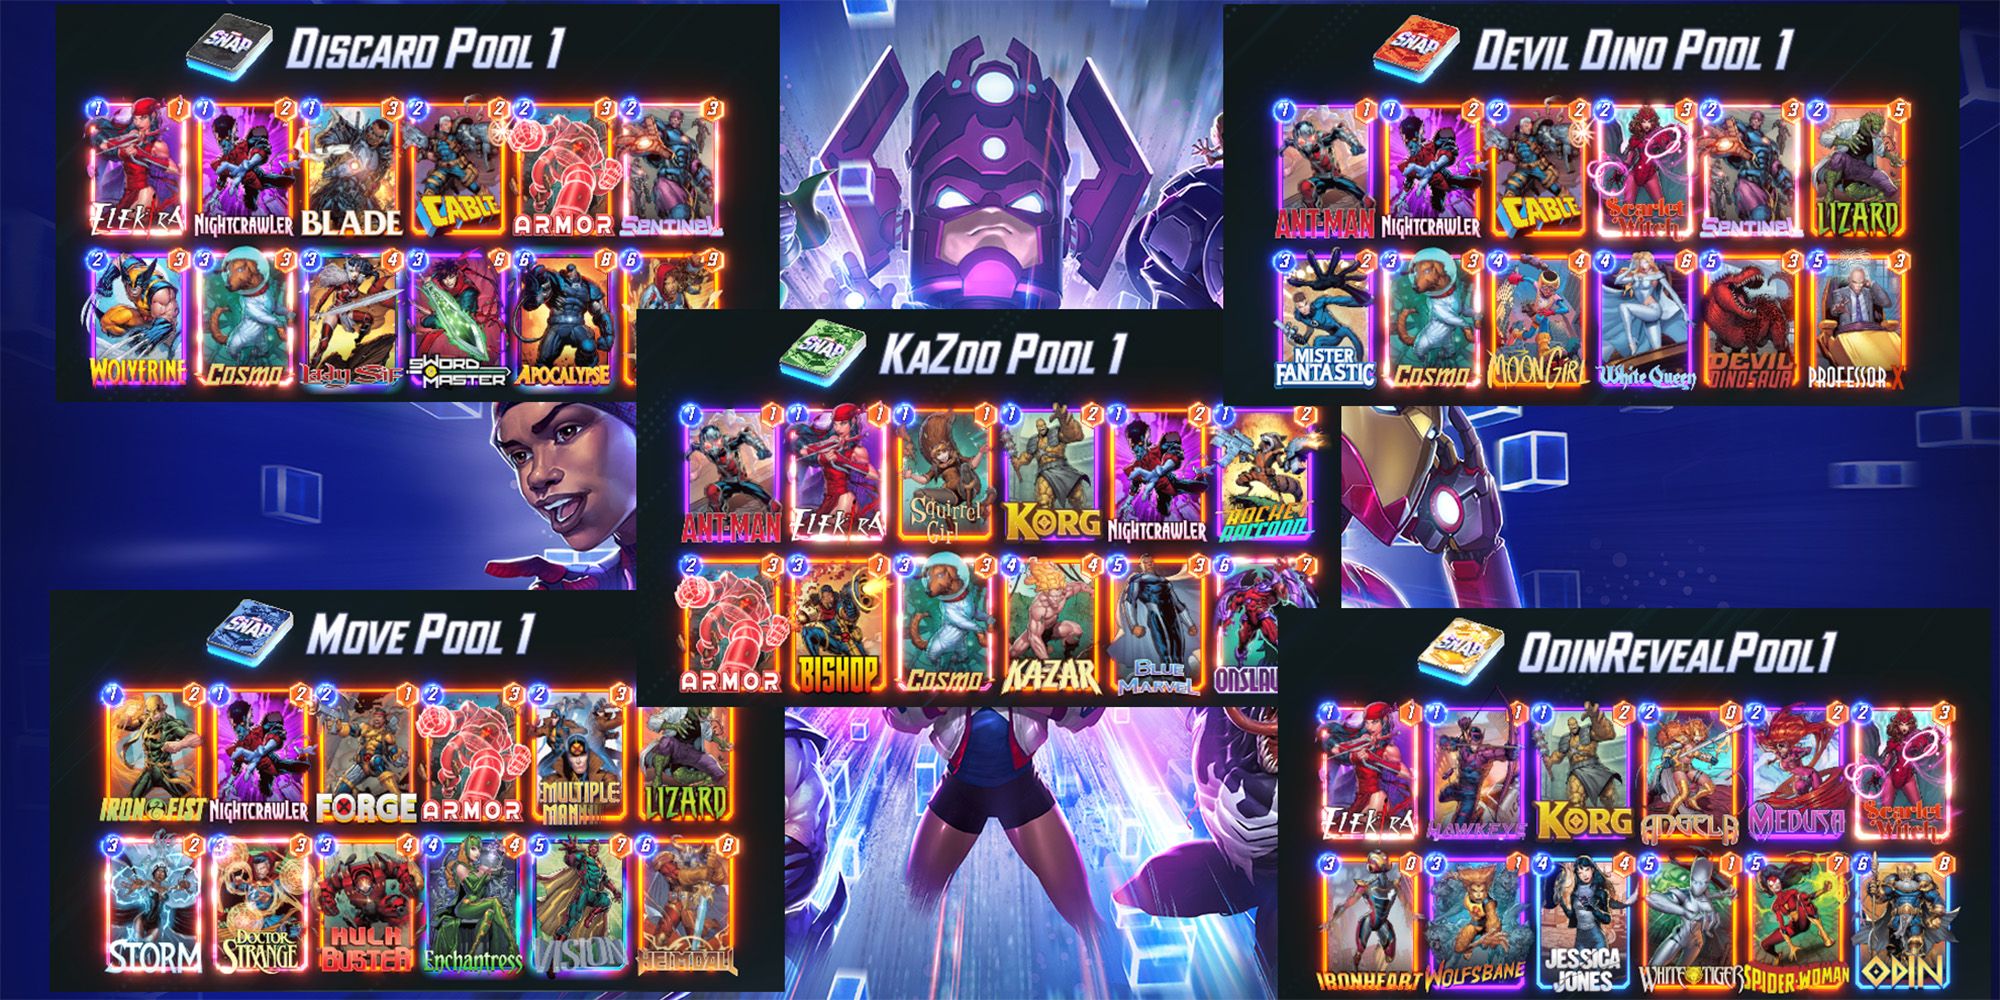 Here Are The Four Best Tier 1 'Marvel Snap' Decks In The December Meta